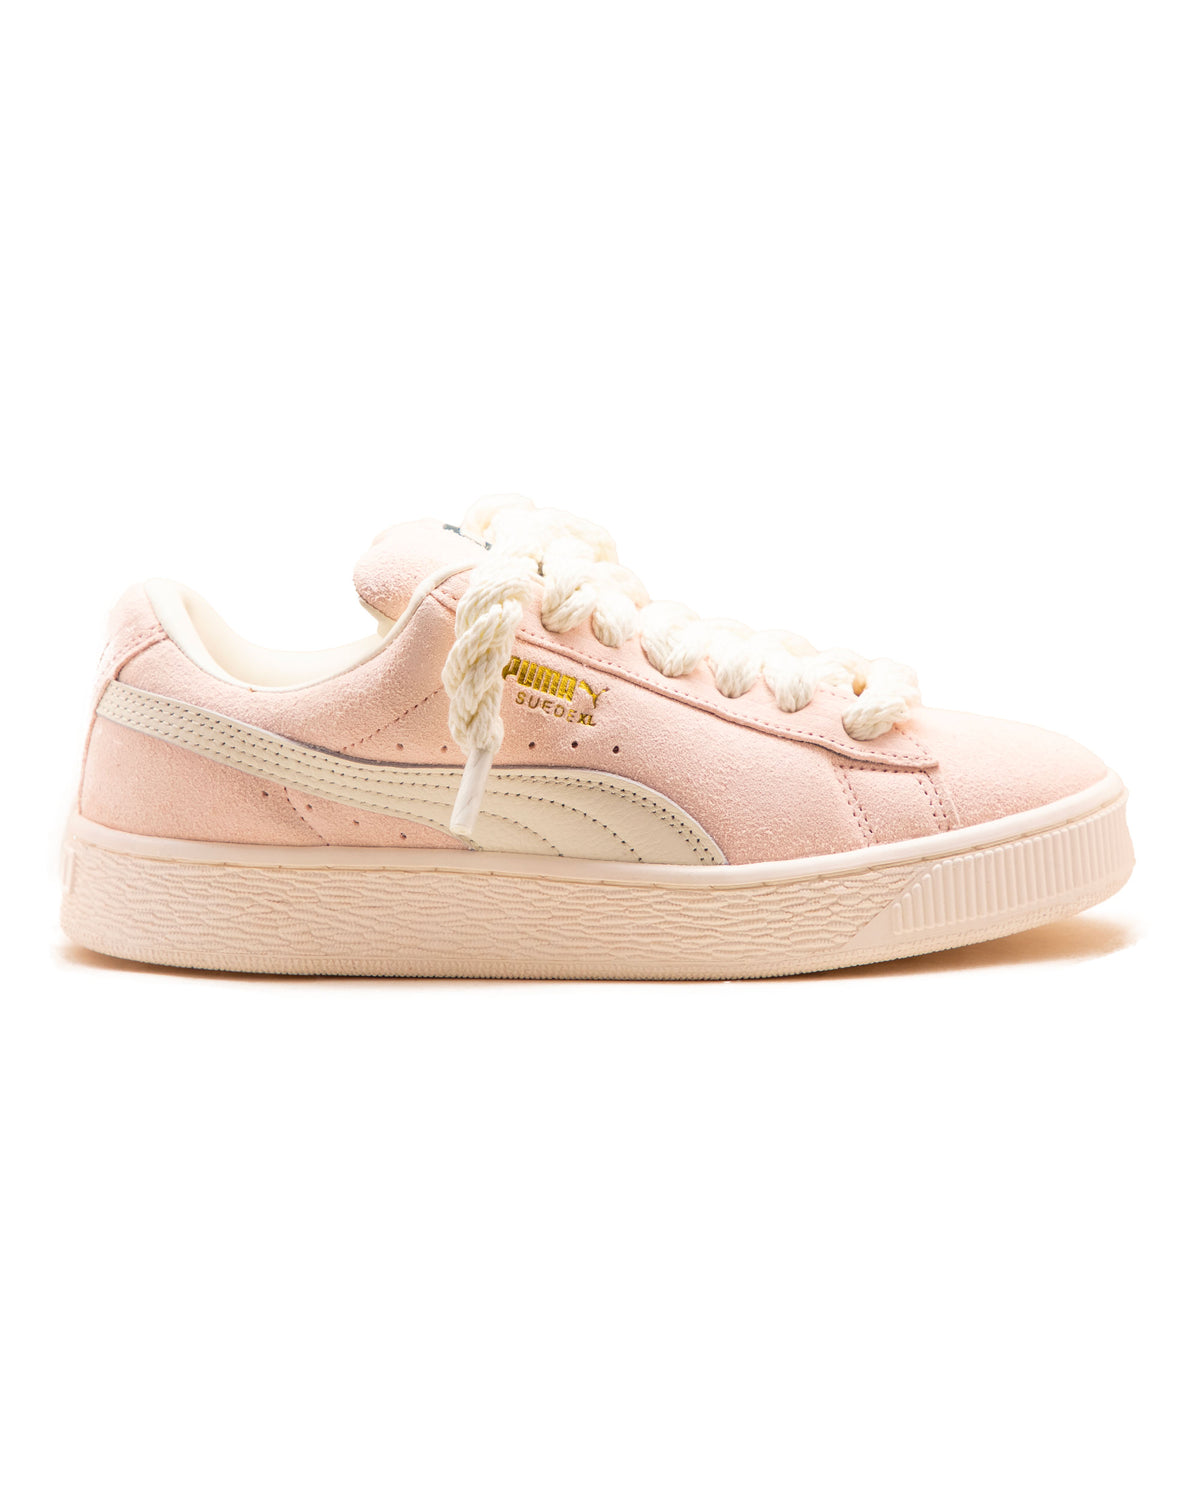 Puma Suede XL Rope Frosted Ivory-Vapor Gray